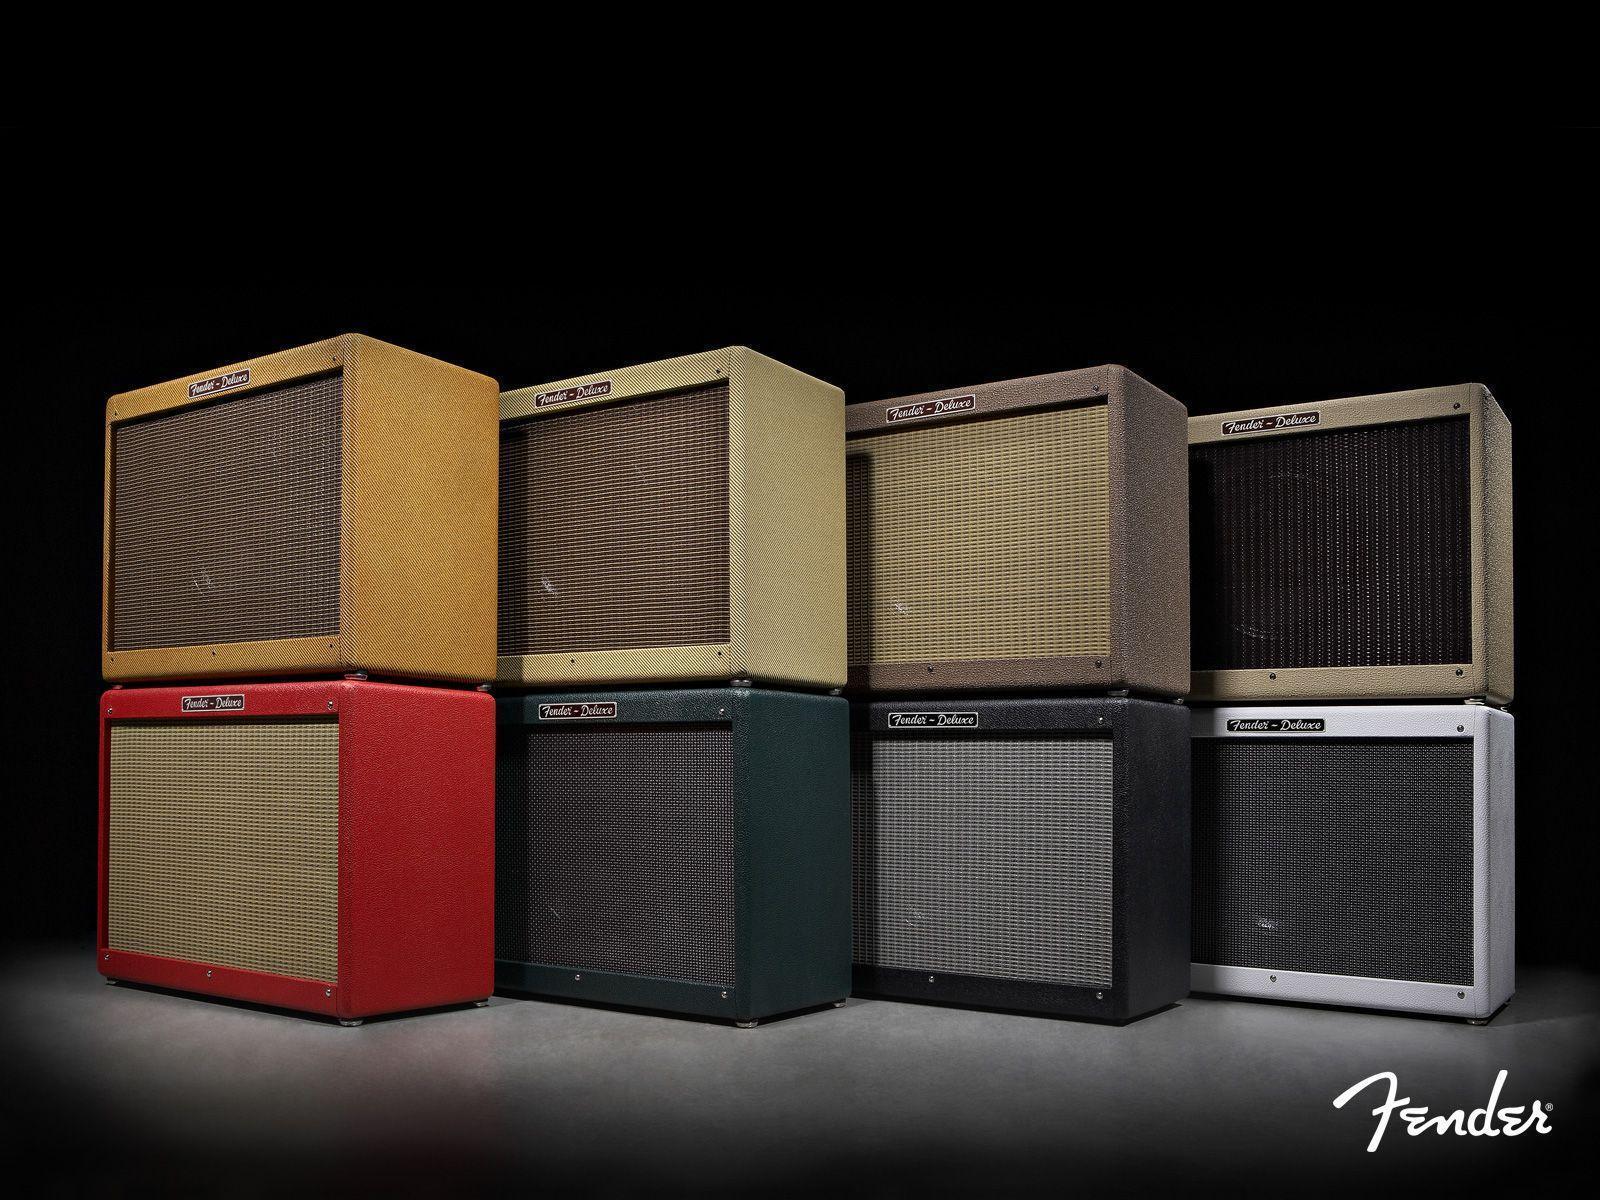 Fender Amp wall wallpaper by cmdry72. Guitar